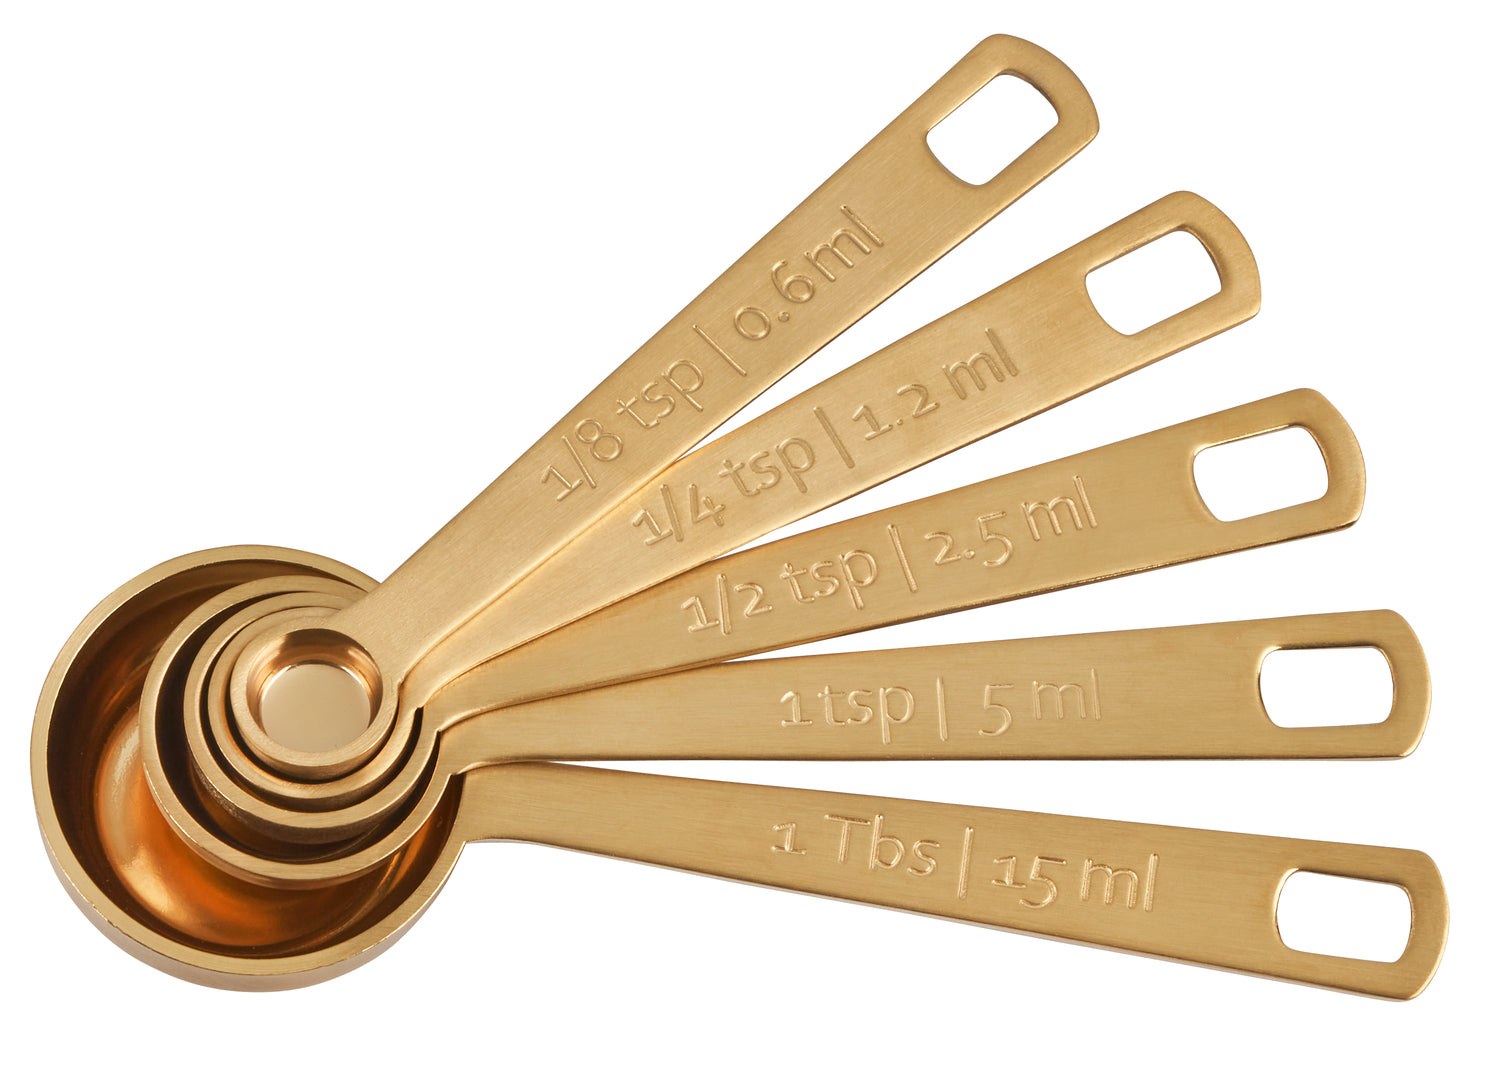 Le Creuset Measuring Spoons, Gold - Set of 5